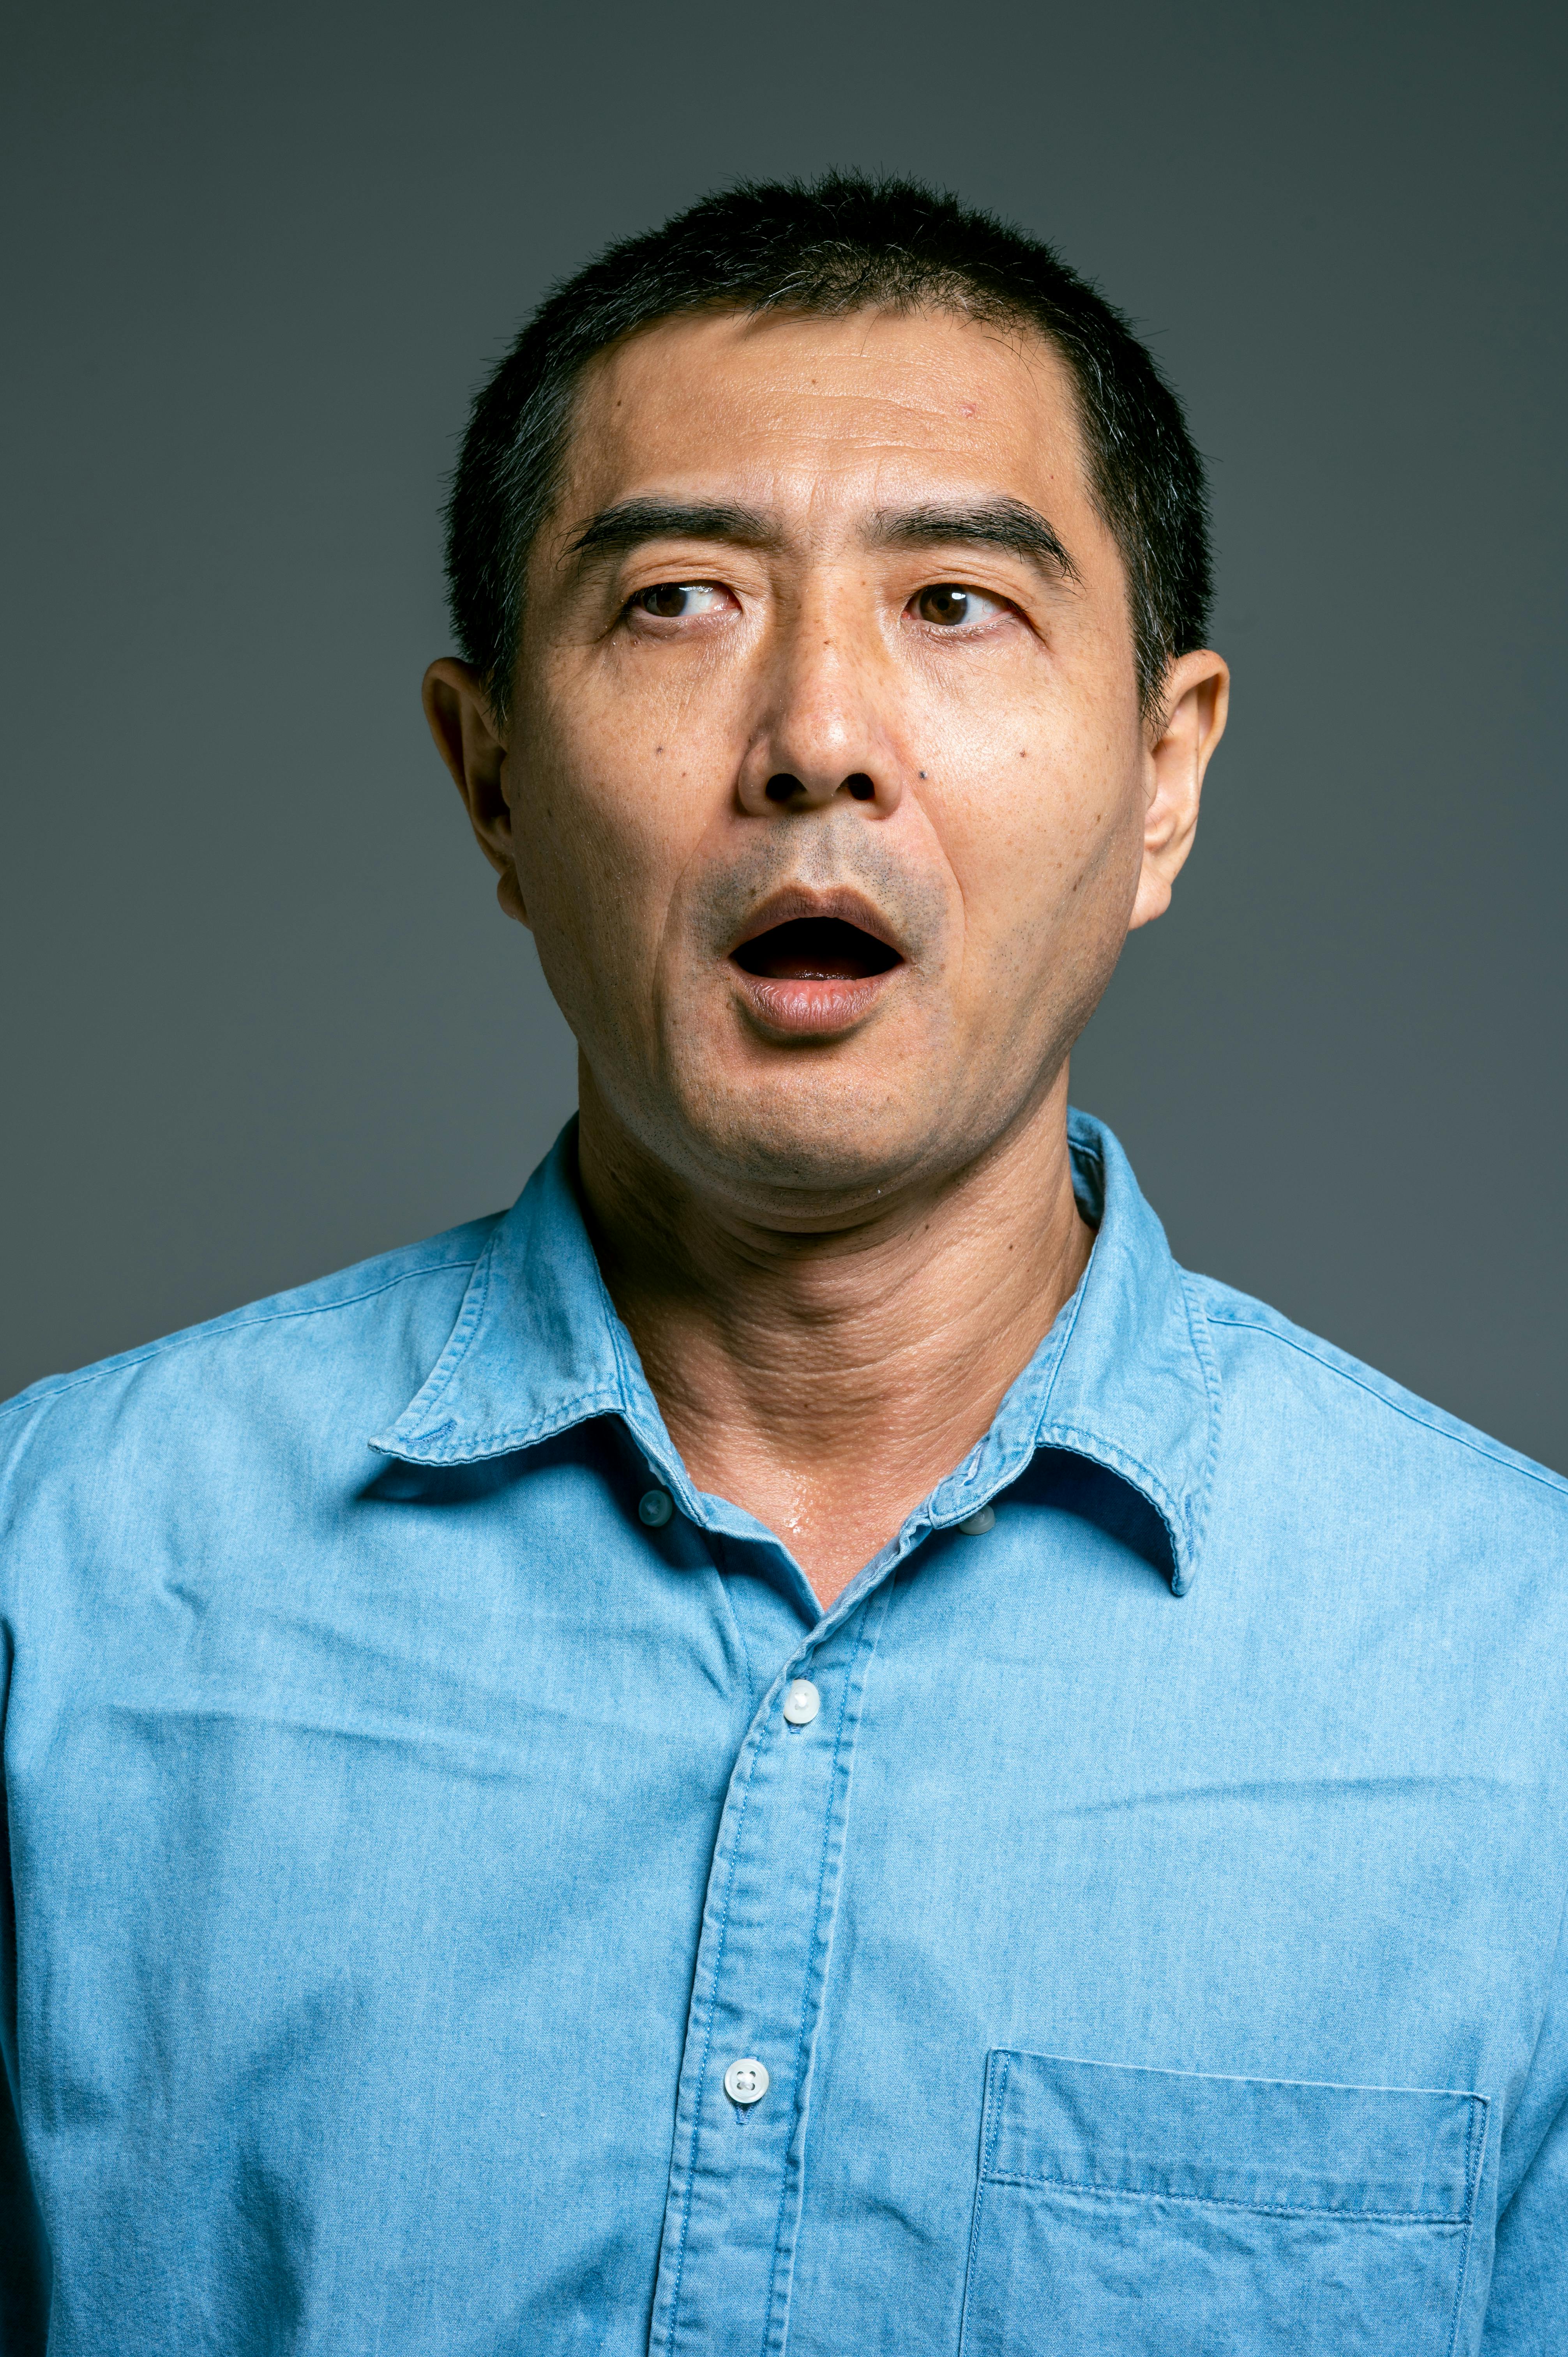 Speechless and shocked man | Source: Pexels